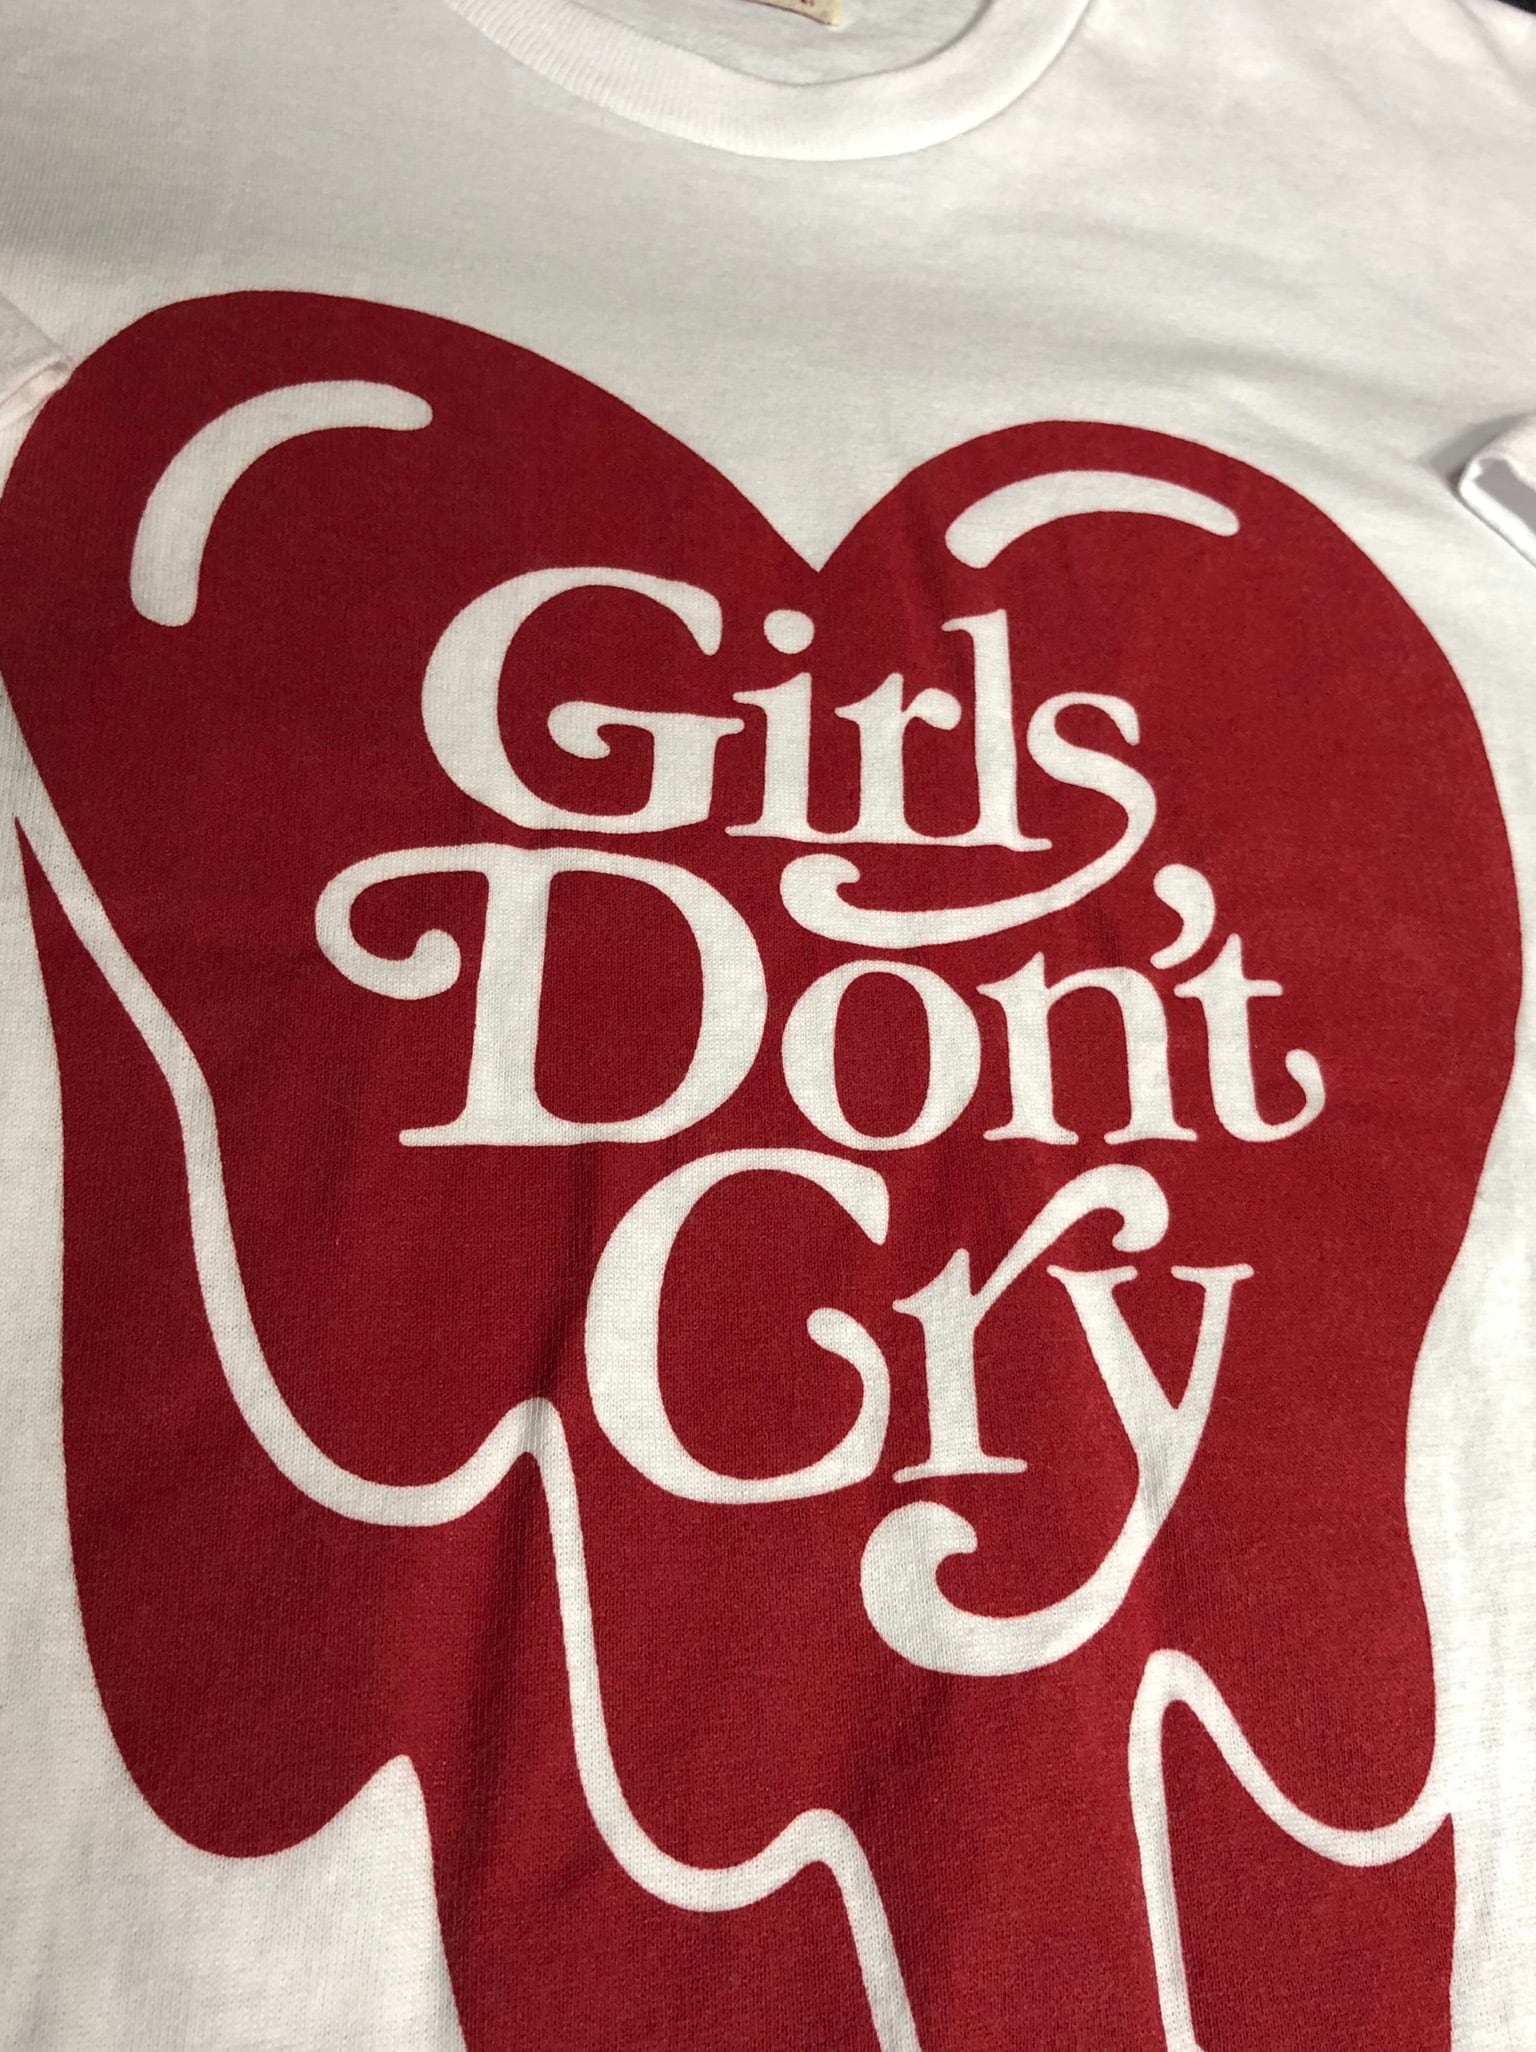 Girls Don't Cry × Emotionally Unavailable Logo T-shirt | style ...